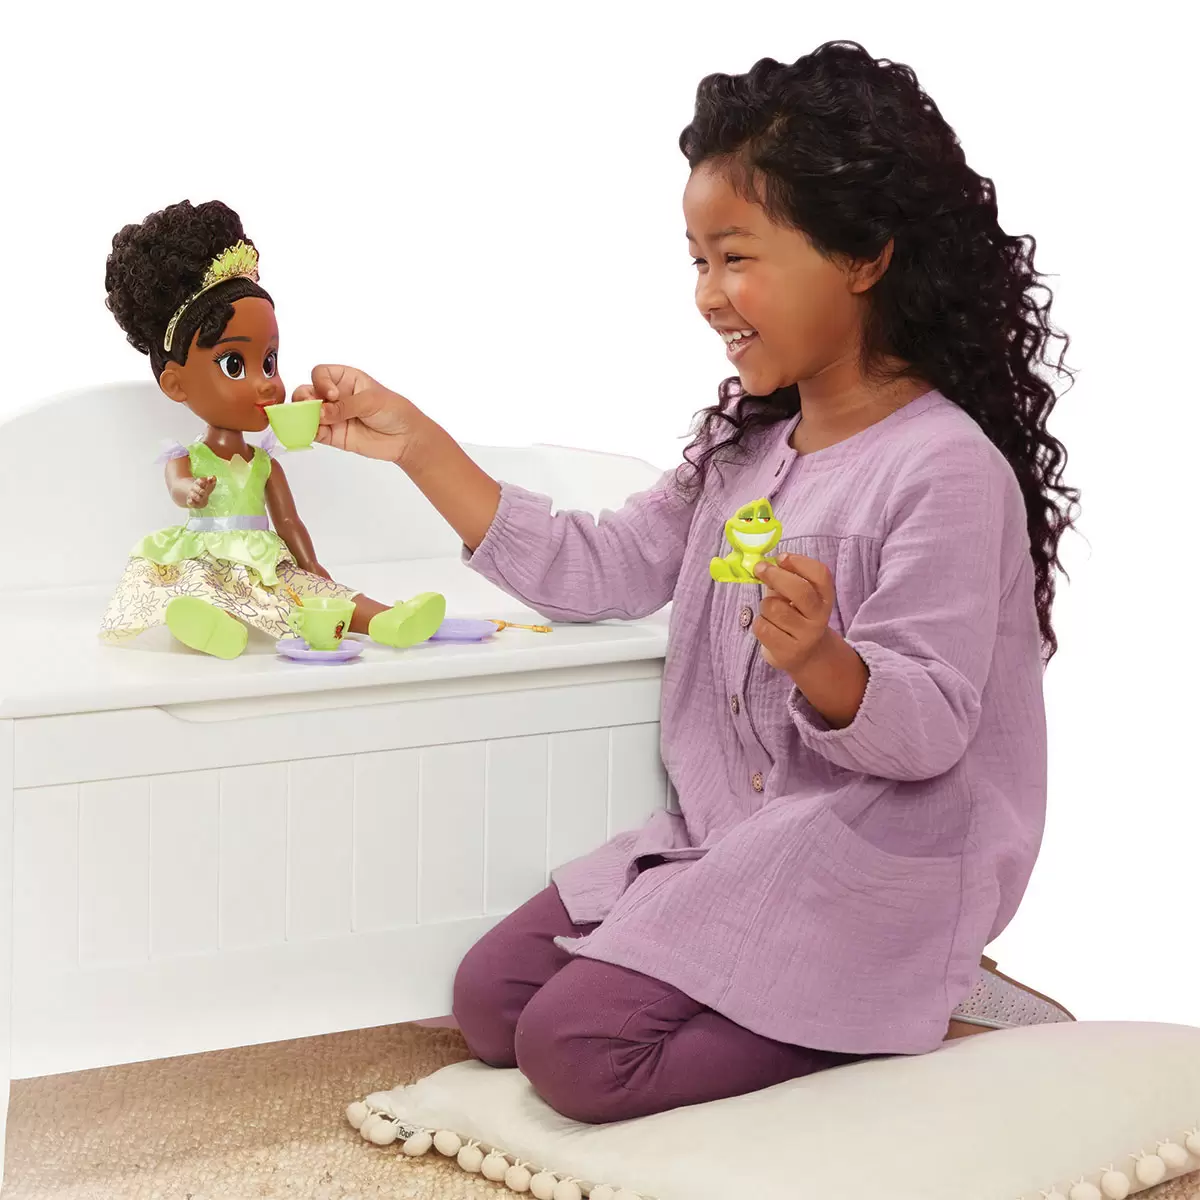 Buy Disney Tea Time Party Doll Tiana & Prince Naveen Lifestyle Image at Costco.co.uk